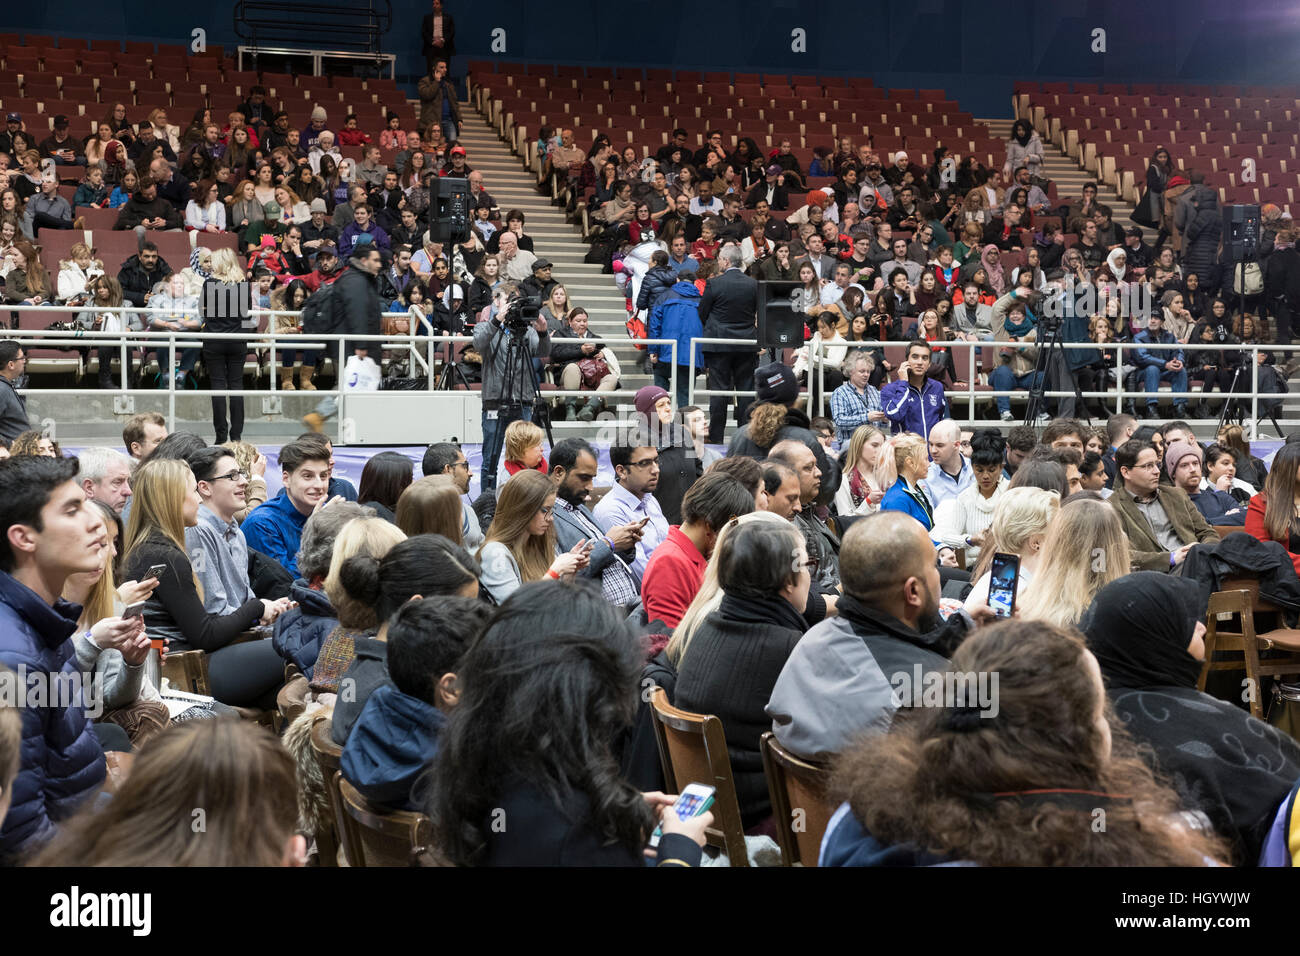 London, Ontario, Canada, 13th January, 2017. Members of the audience wait for the Prime Minister of Canada, before the start of a town hall Q&A. London was one of the Prime Minister's stops as part of his cross-country tour. Credit: Rubens Alarcon/Alamy Live News Stock Photo